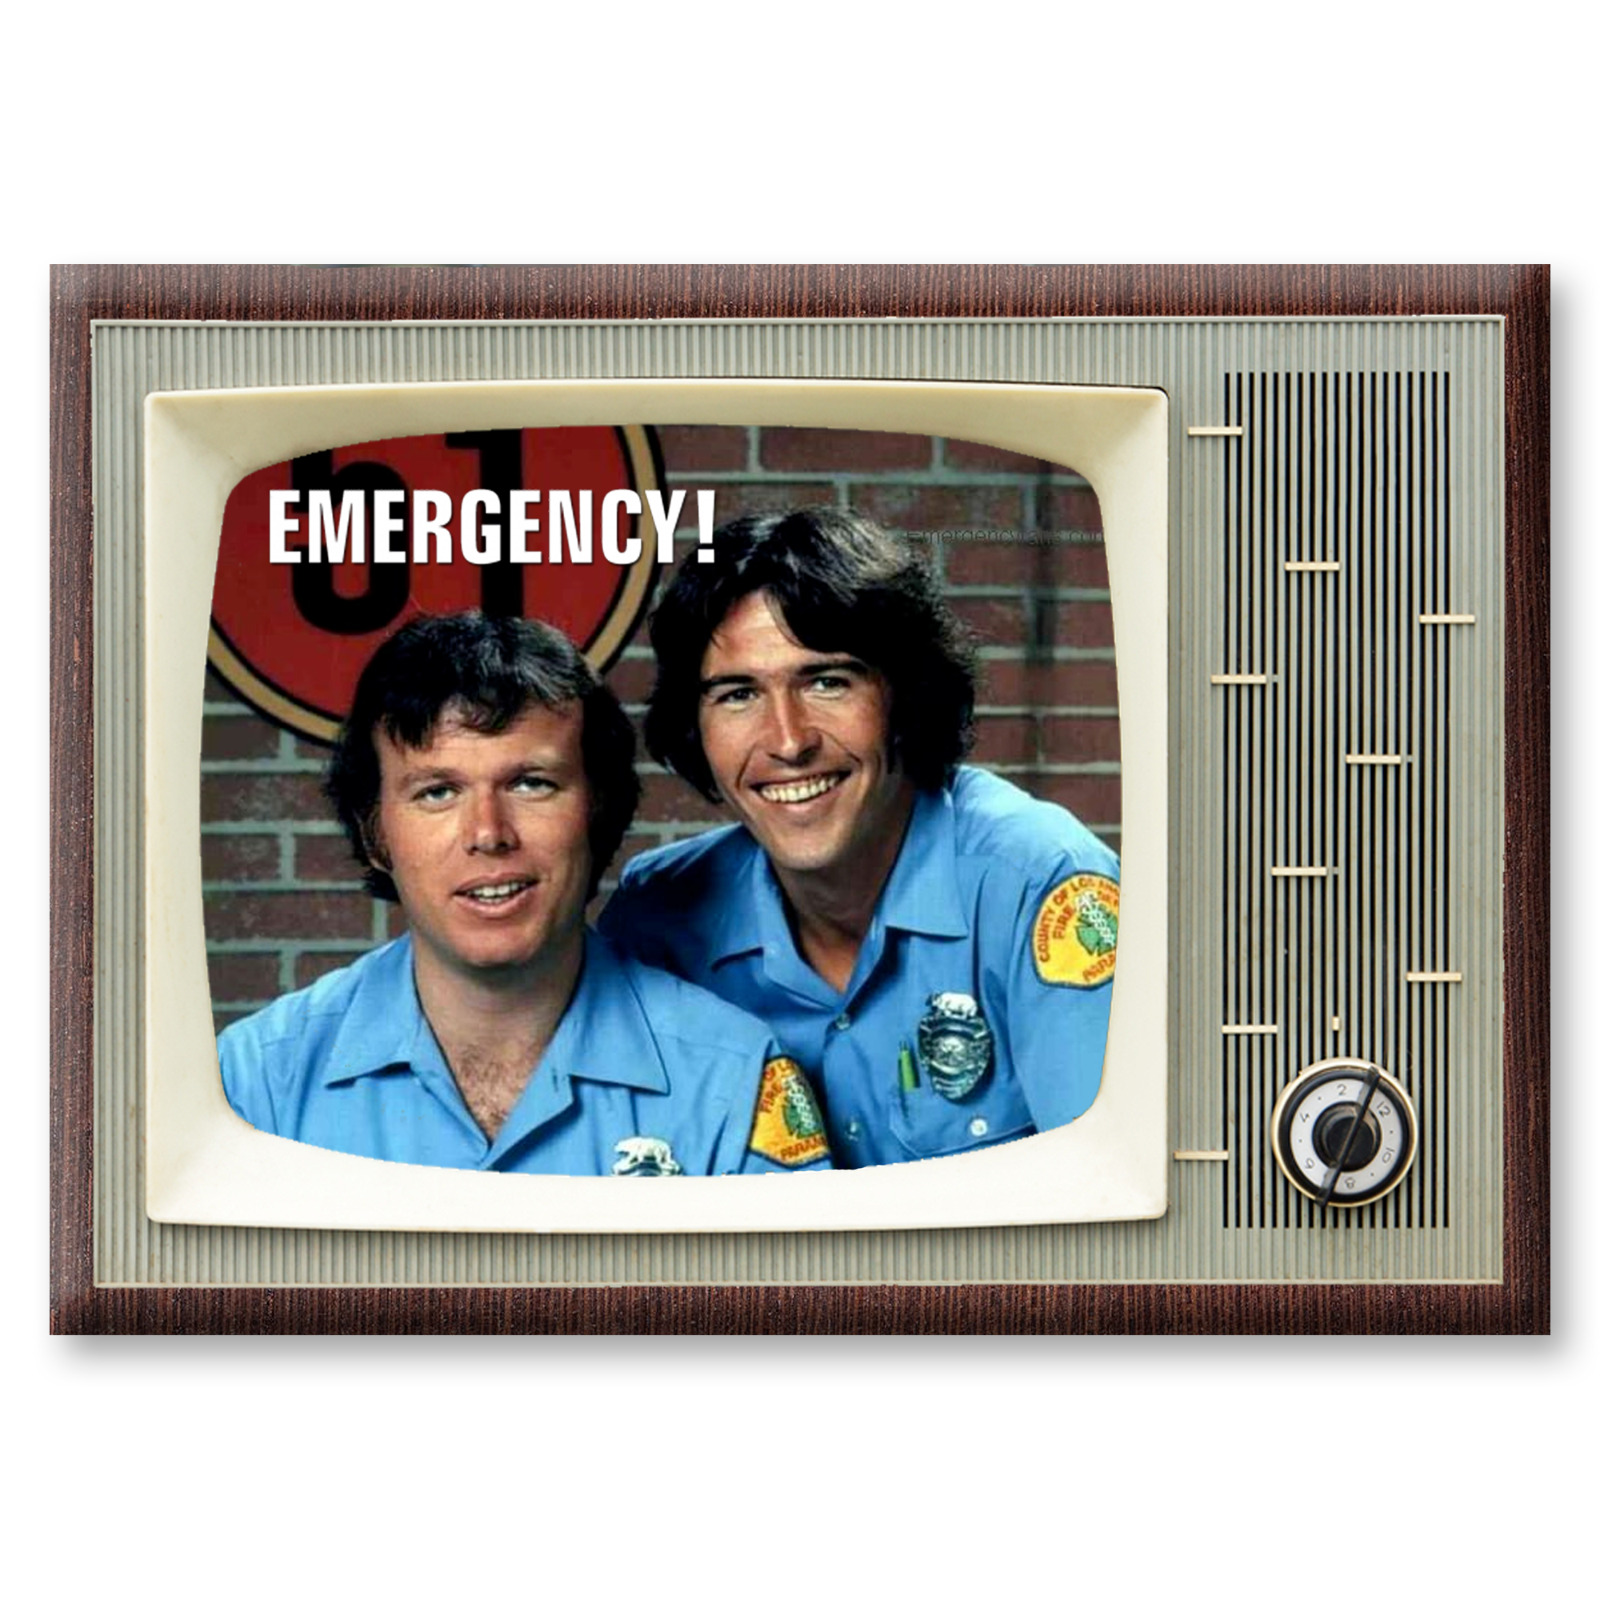 EMERGENCY TV Show Classic TV 3.5 inches x 2.5 inches FRIDGE MAGNET